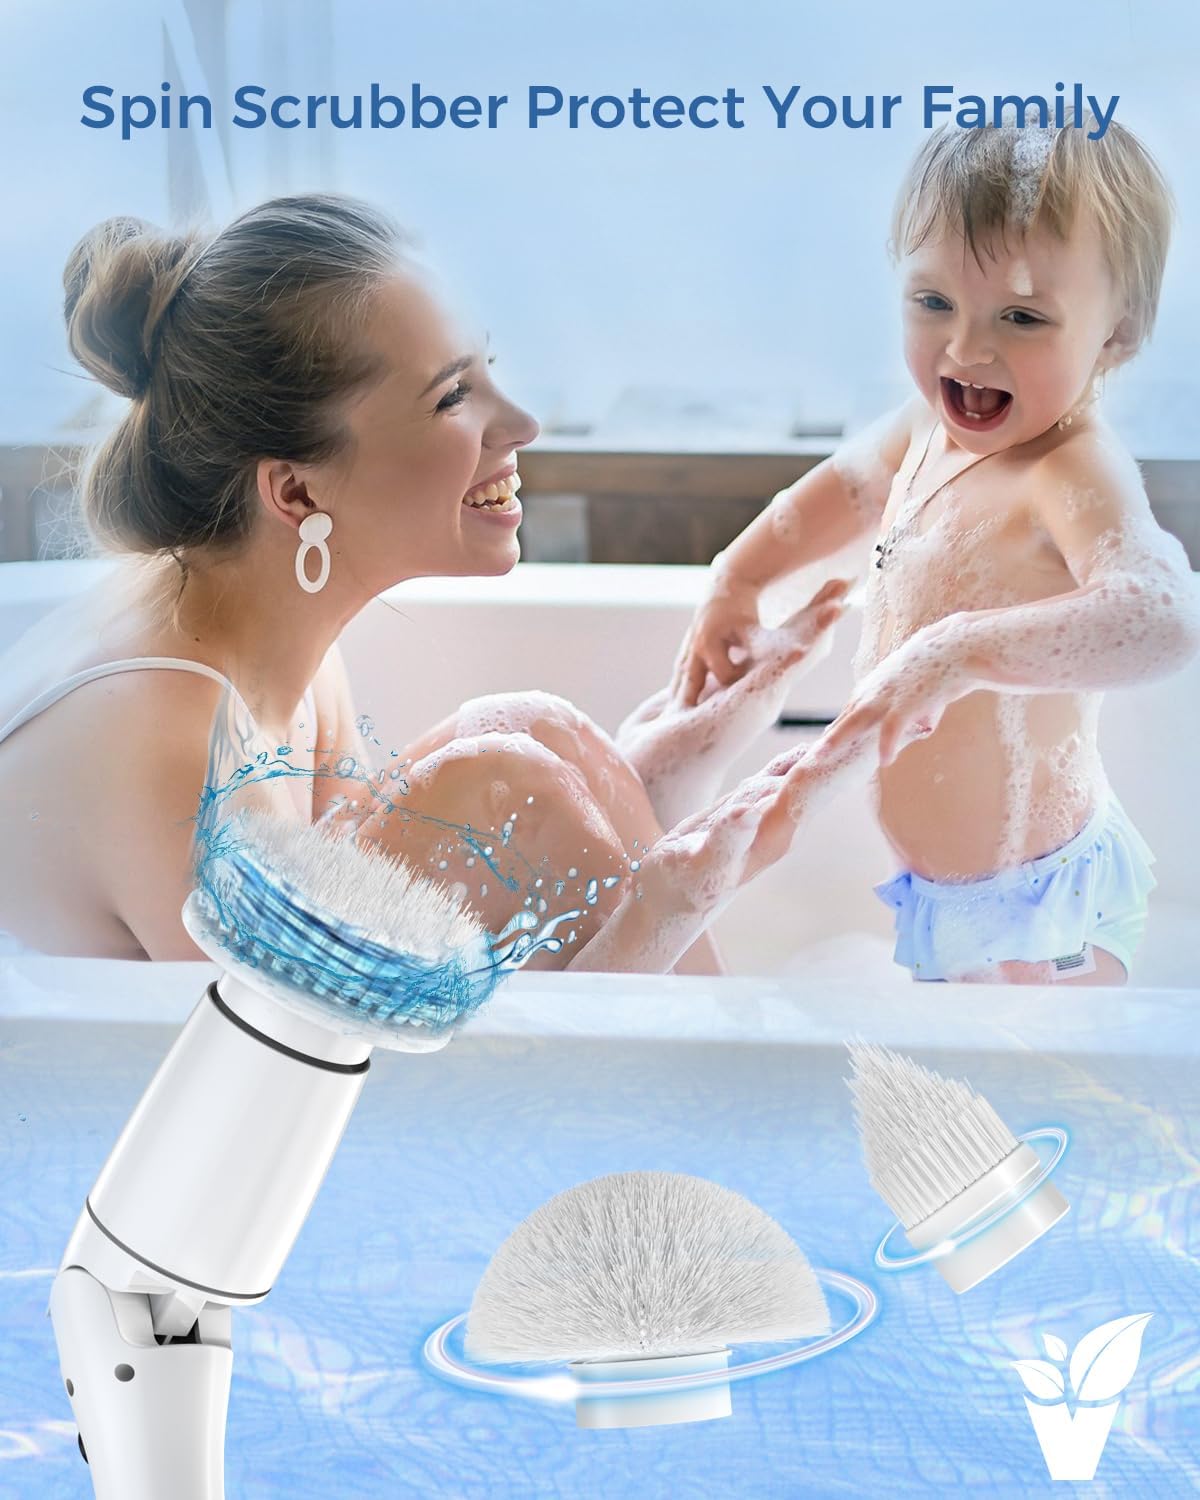 VEWIOR Electric Spin Scrubber, Cordless Cleaning Brush with Display and 3 Adjustable Angle 2 Speeds 5 Replaceable Brush Heads, Power Shower Scrubber with Extension Handle for Floor Bathroom Tile Grout Vewior